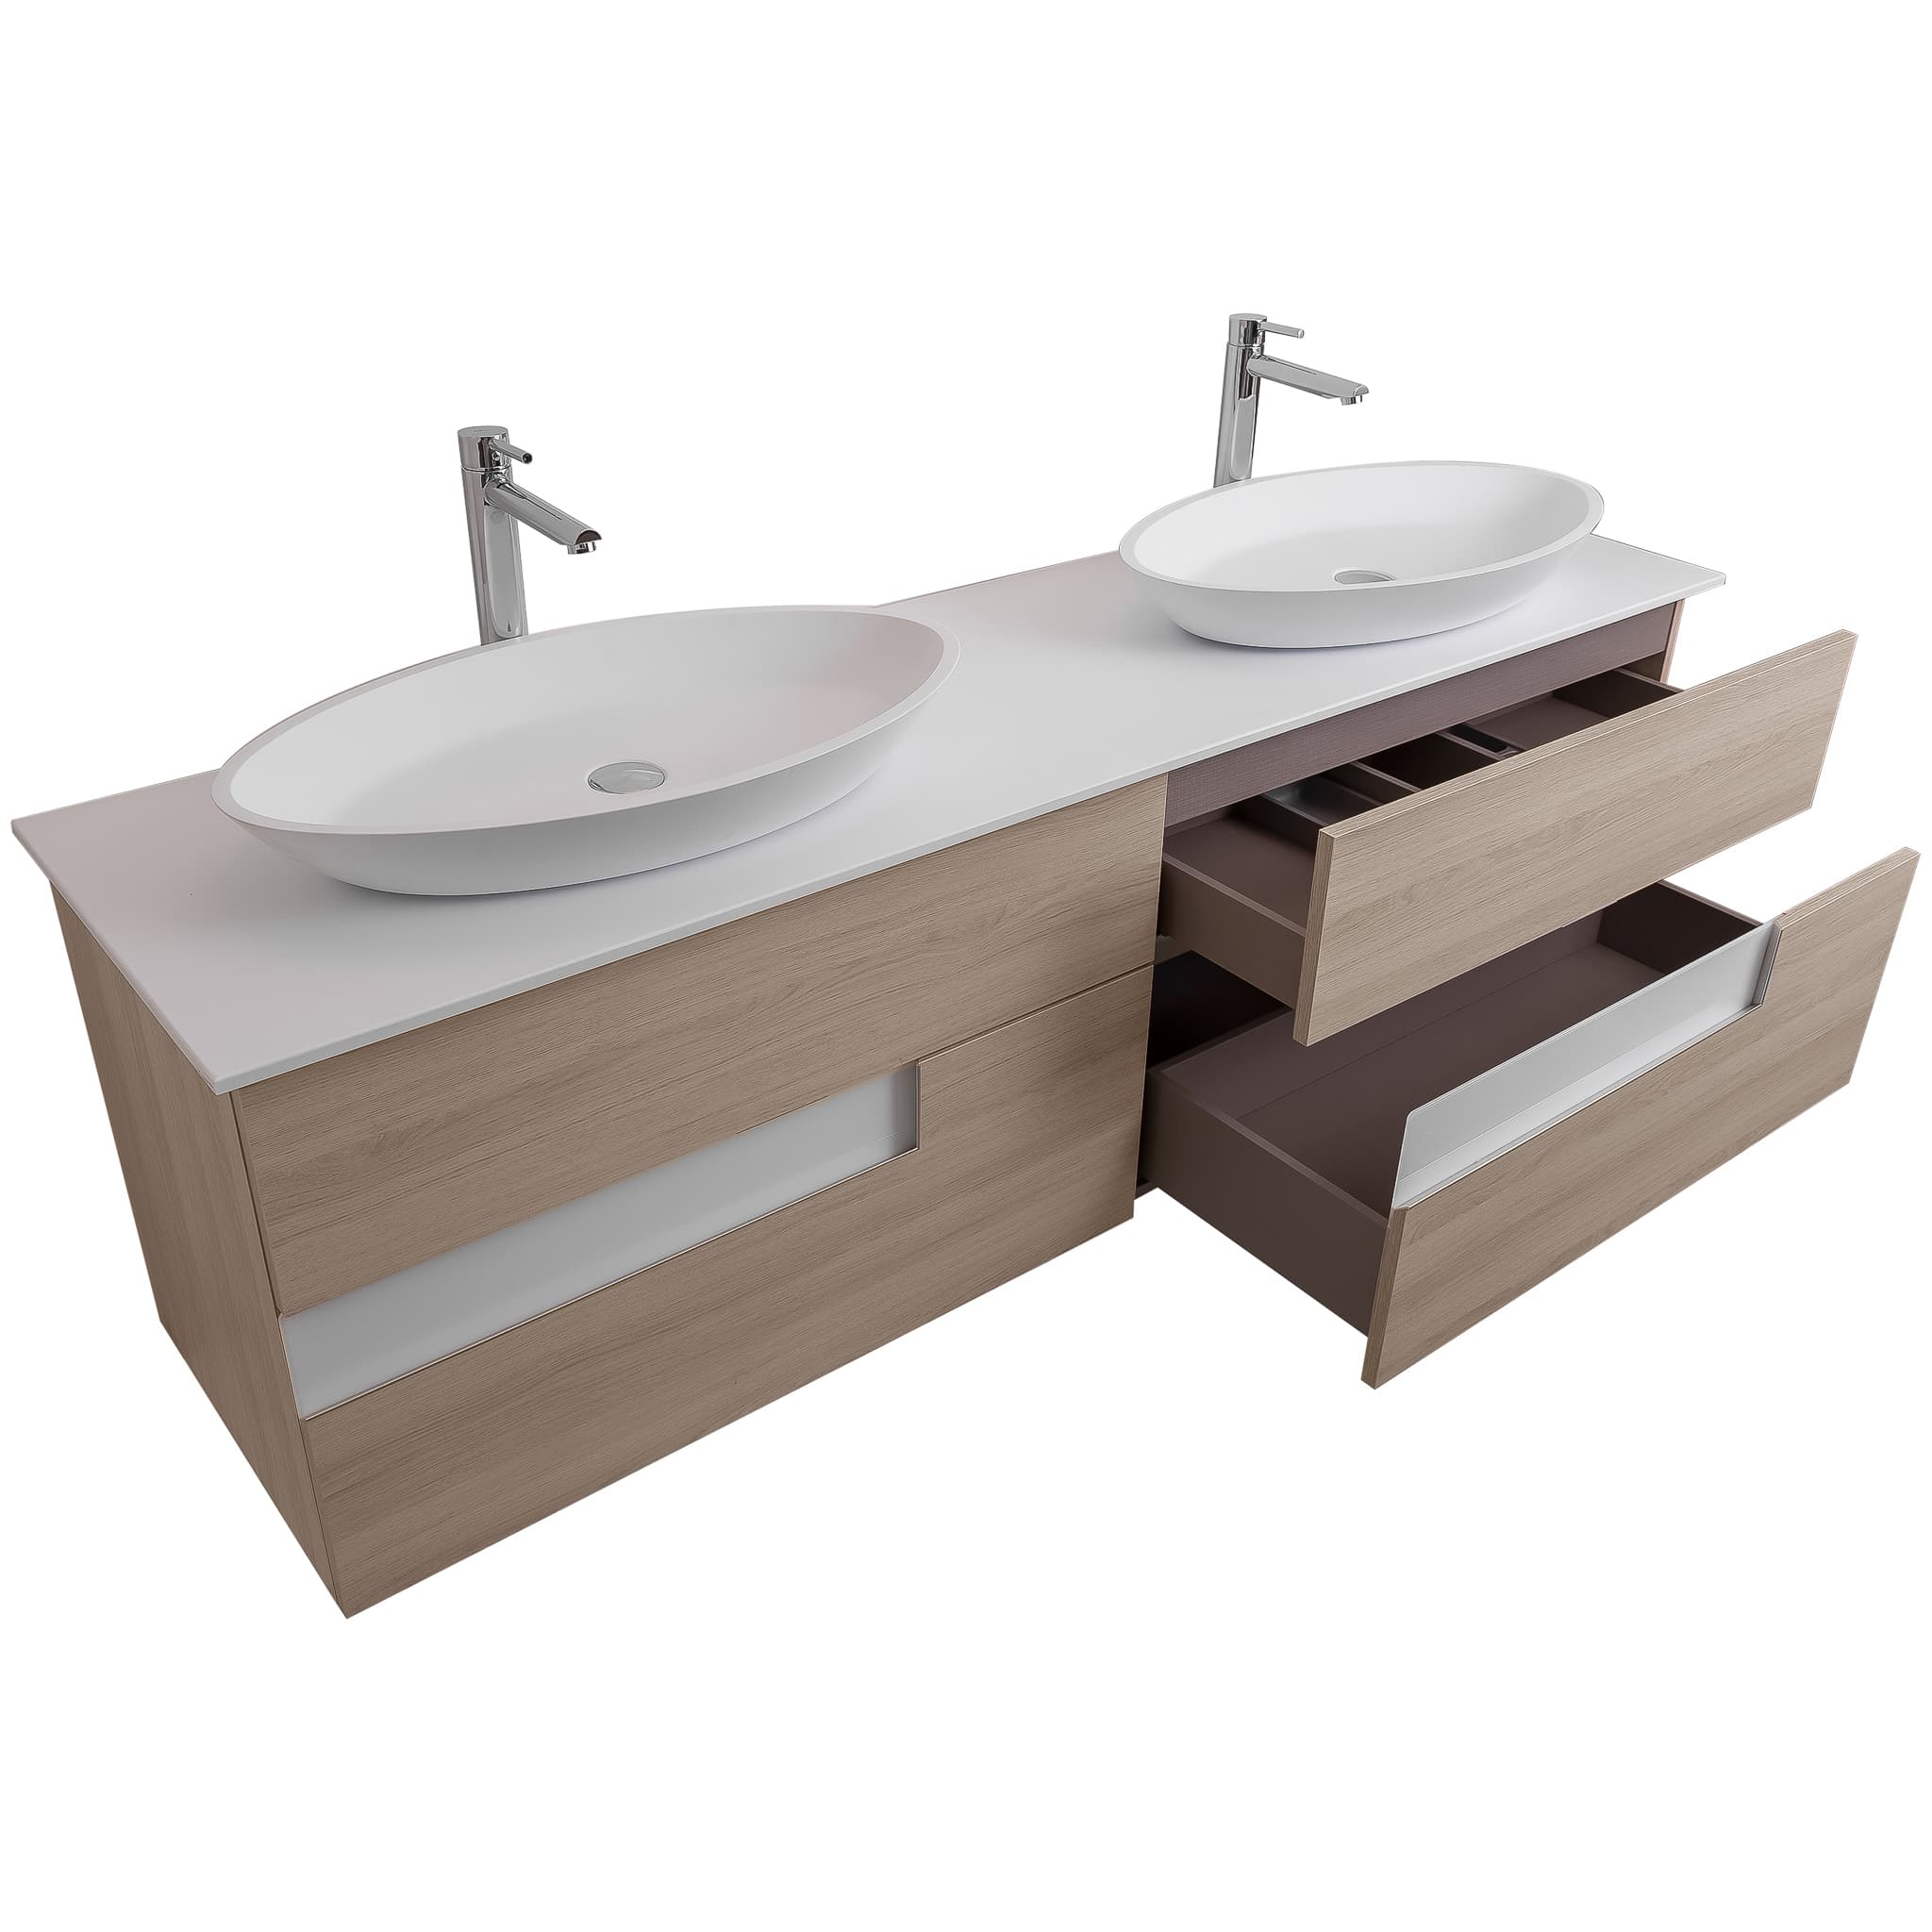 Vision 72 Natural Light Wood Cabinet, Solid Surface Flat White Counter And Two Oval Solid Surface White Basin 1305, Wall Mounted Modern Vanity Set